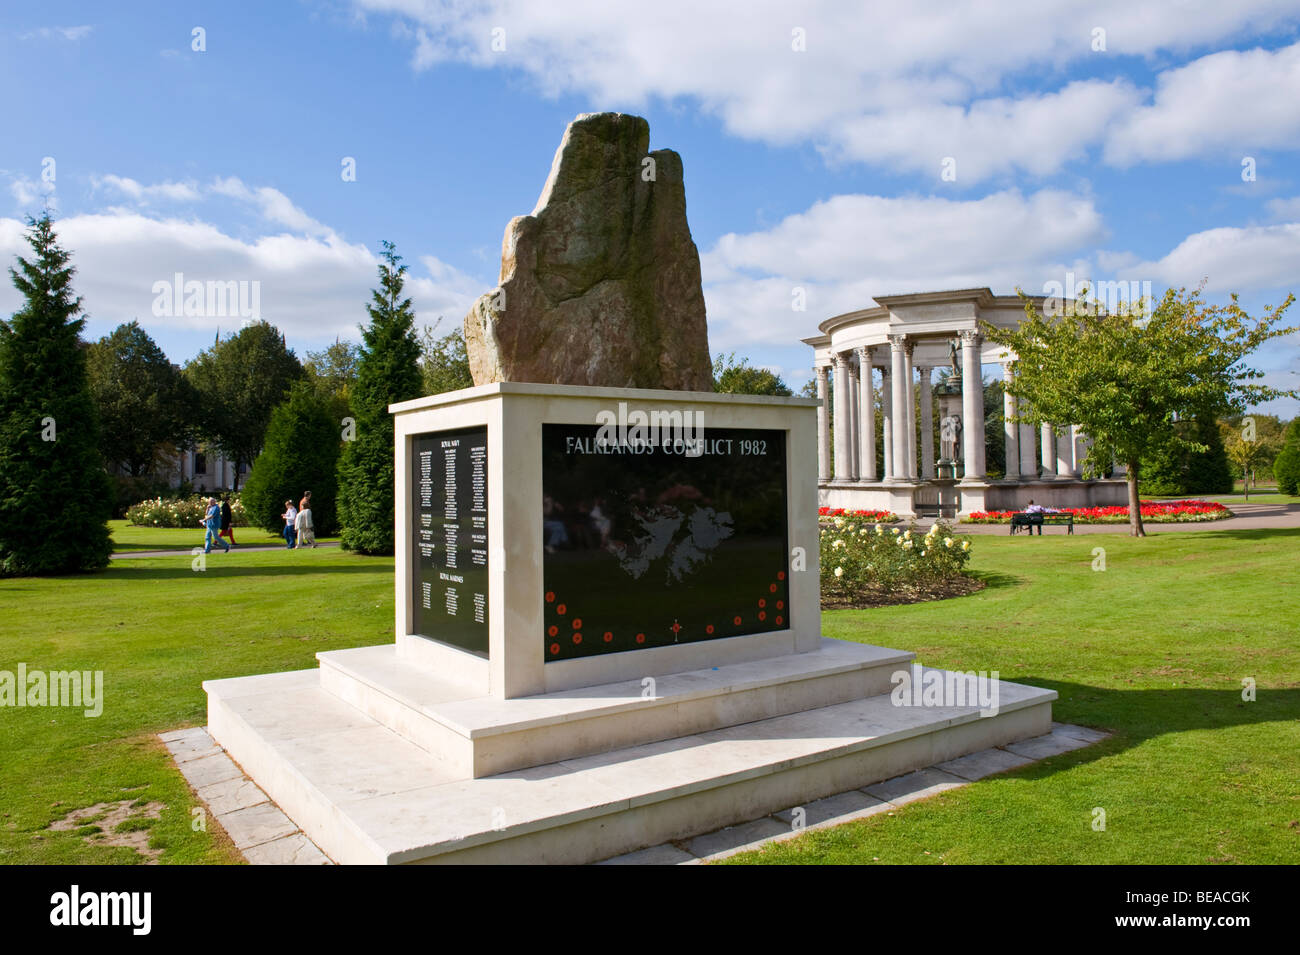 Falklands Conflict 1982 war memorial in Alexandra Gardens Cathays Park in city centre of Cardiff South Wales UK Stock Photo